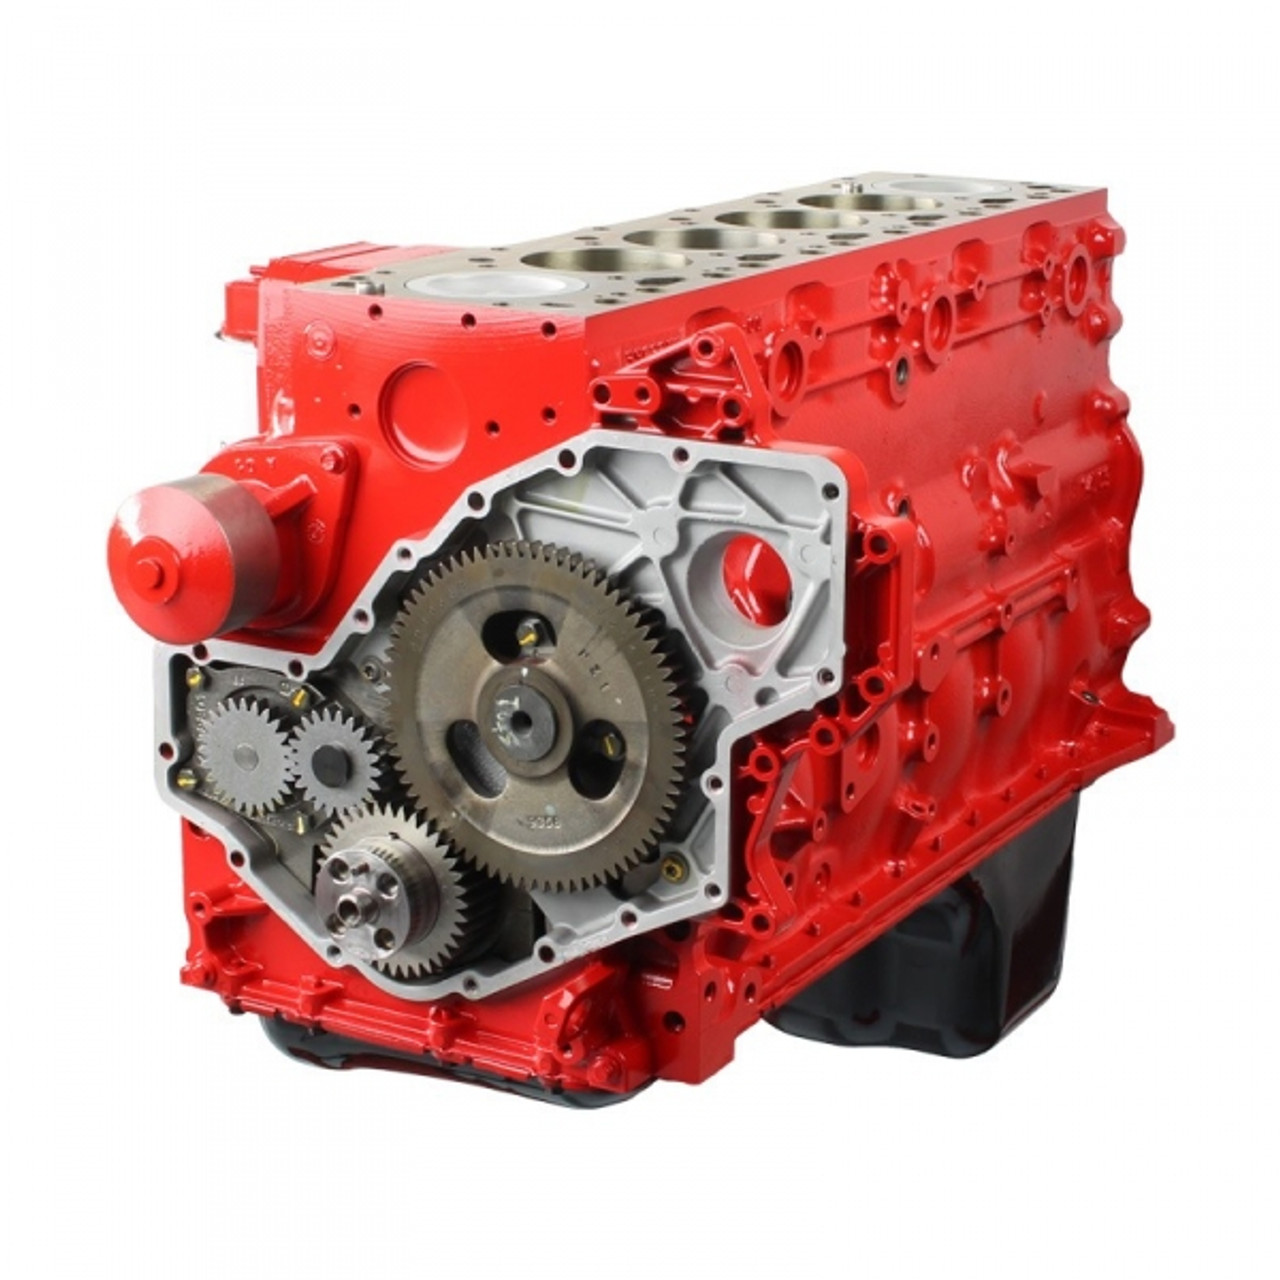 INDUSTRIAL INJECTION REMAN PERFORMANCE SHORT BLOCK ENGINE-Main View